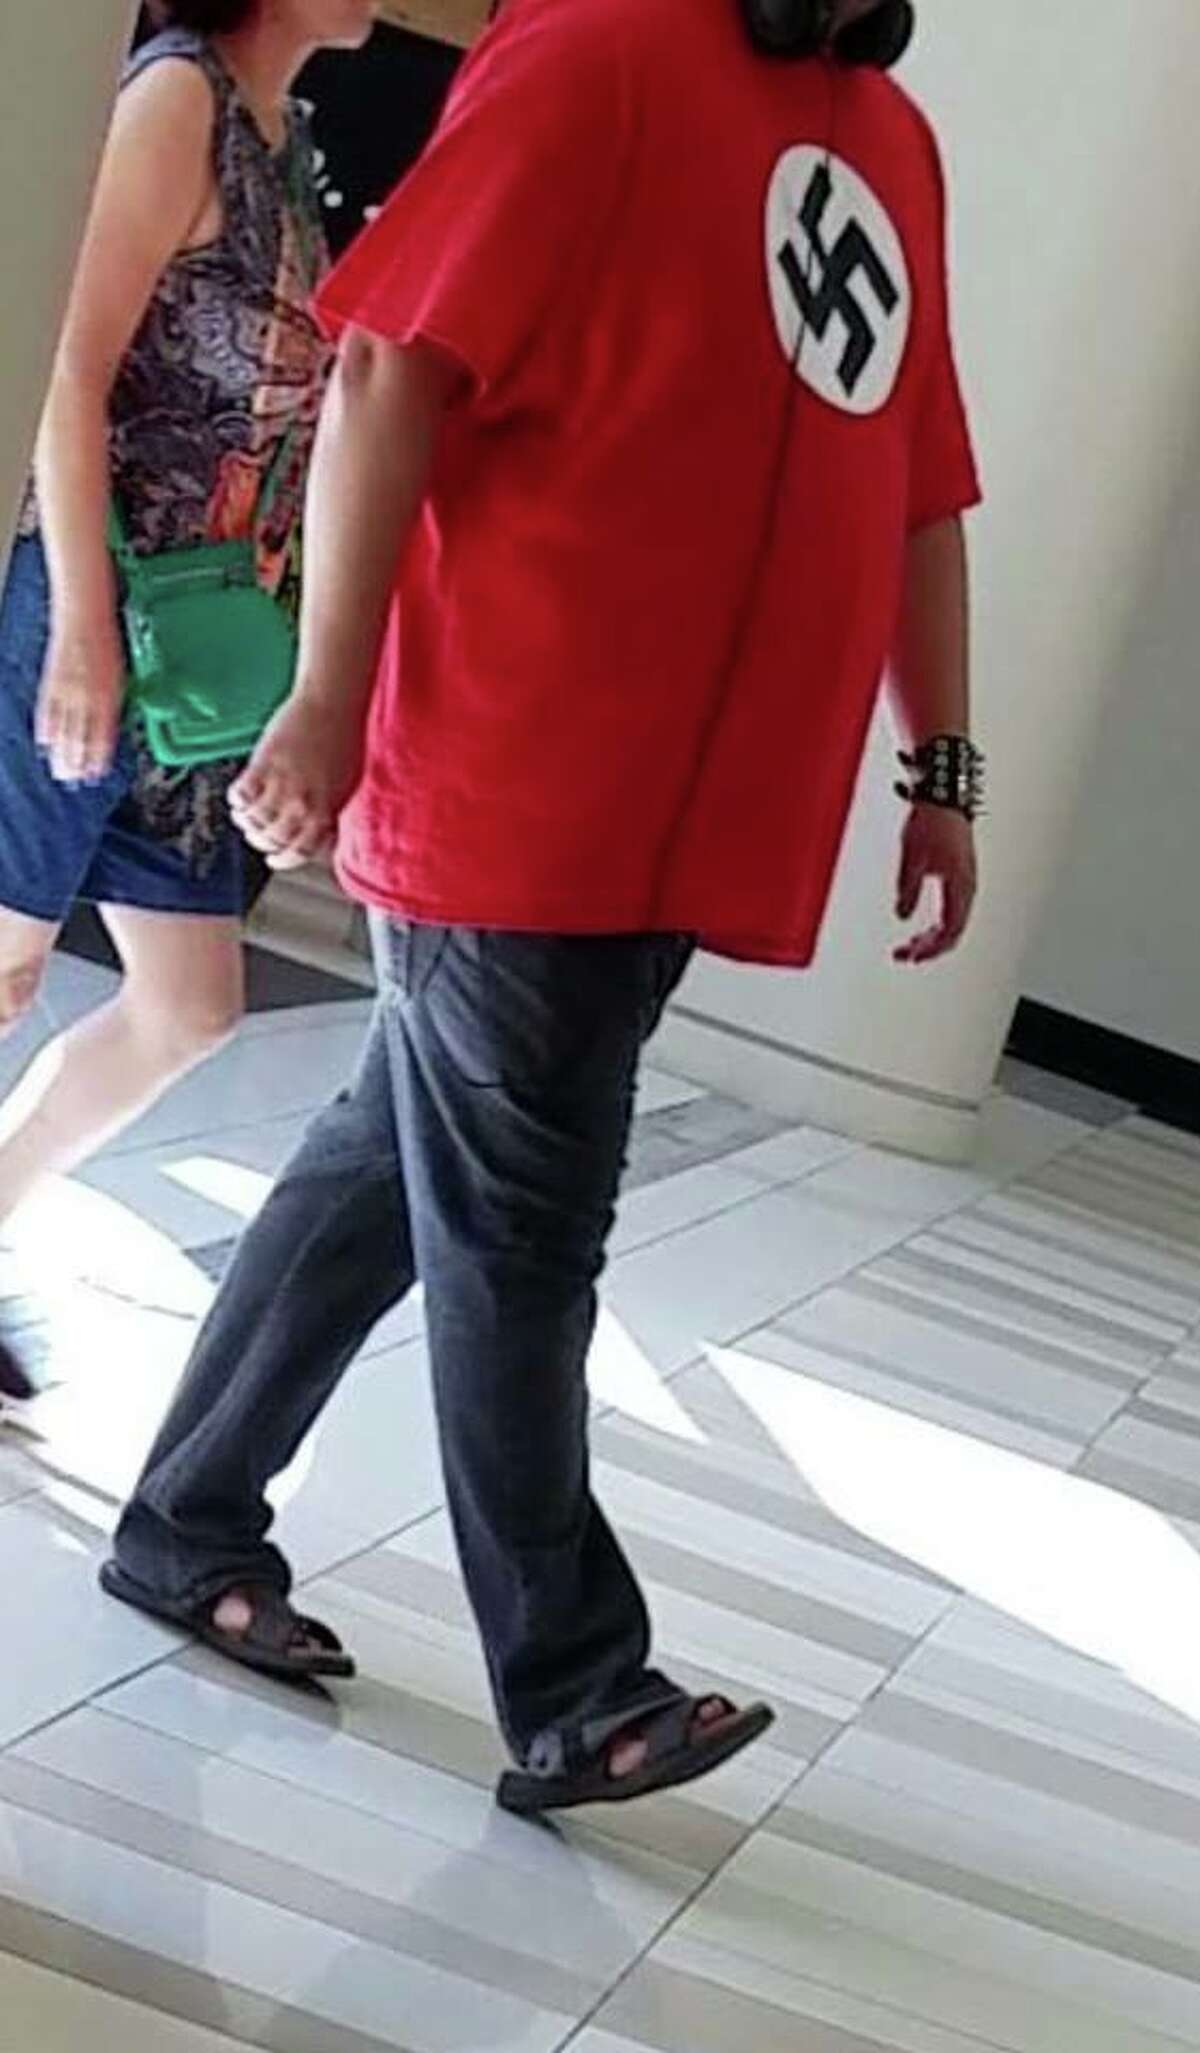 A photo taken by a patron at Crossgates Mall Friday, July 20, 2018 shows an unidentified man wearing a shirt that looks like the Nazi flag. (Provided)